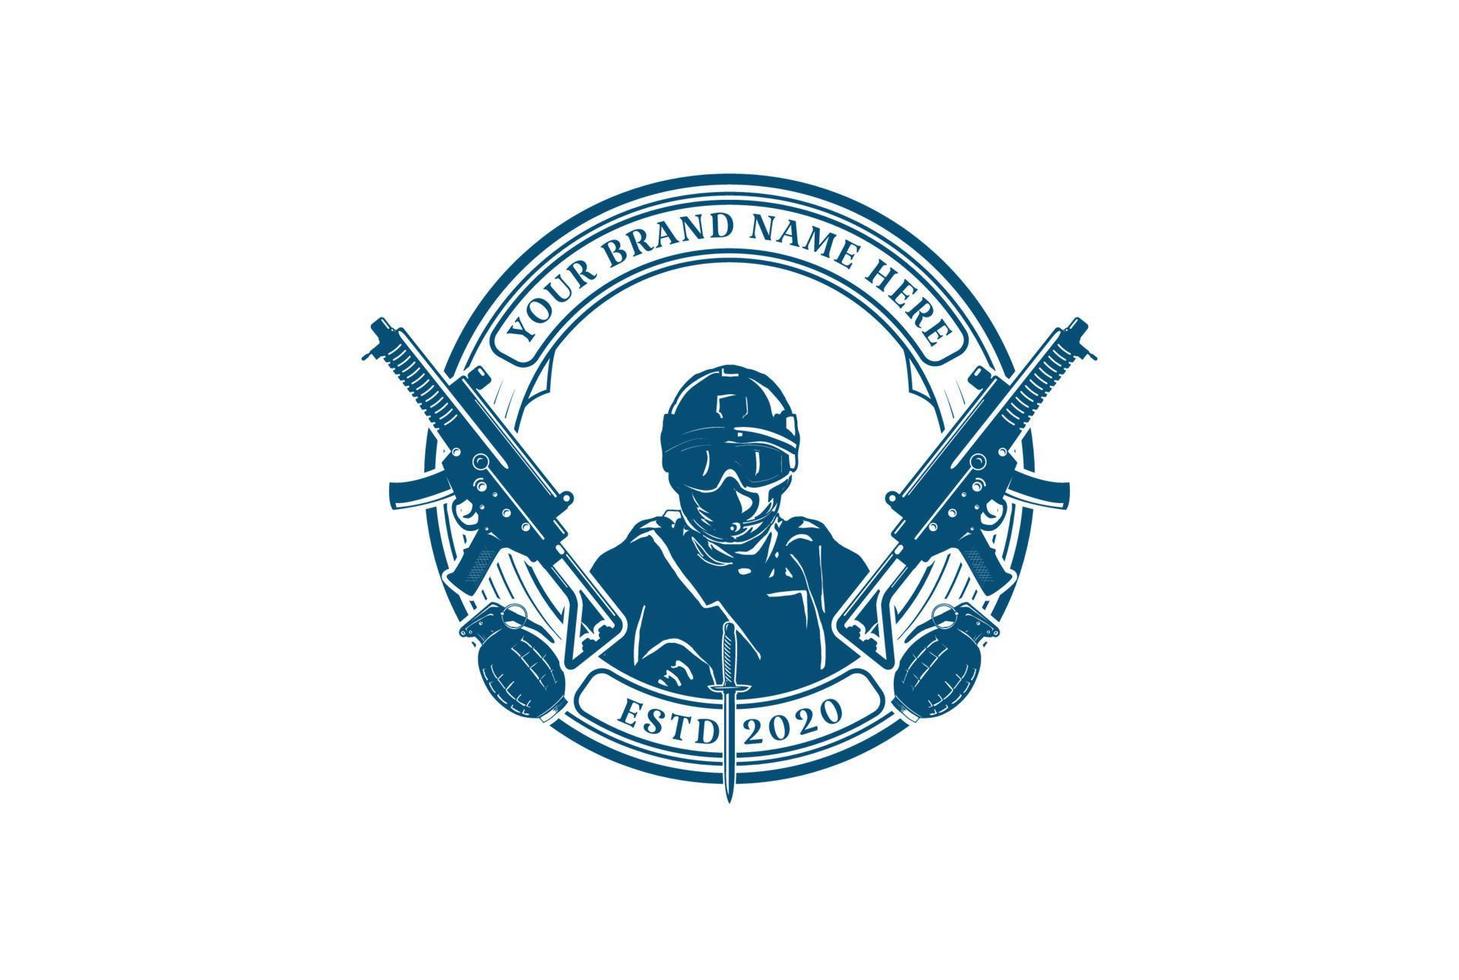 Elite Army Force Navy Soldier with Sub Machine Gun and Grenade for Military Badge Emblem Label Logo Design Vector